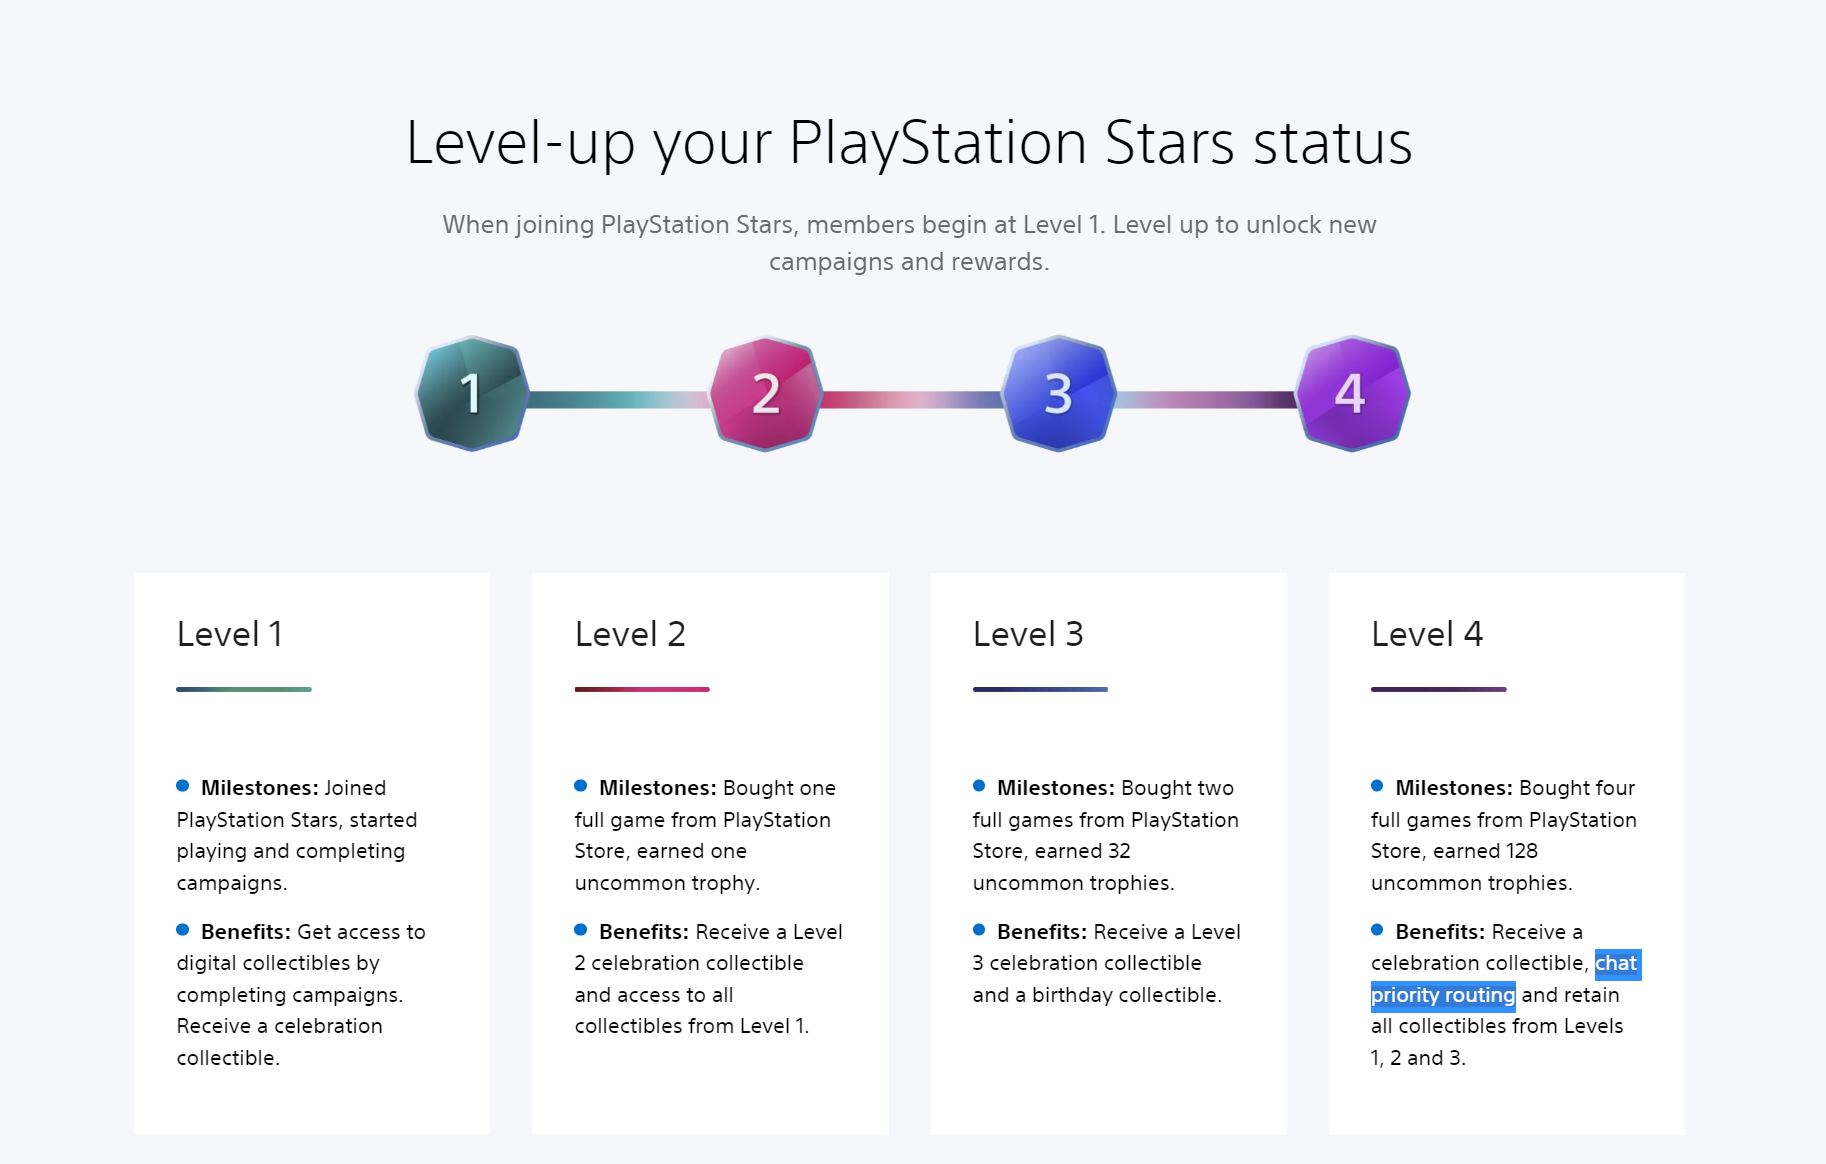 PlayStation Stars: What Benefits Do You Get When You Level Up?